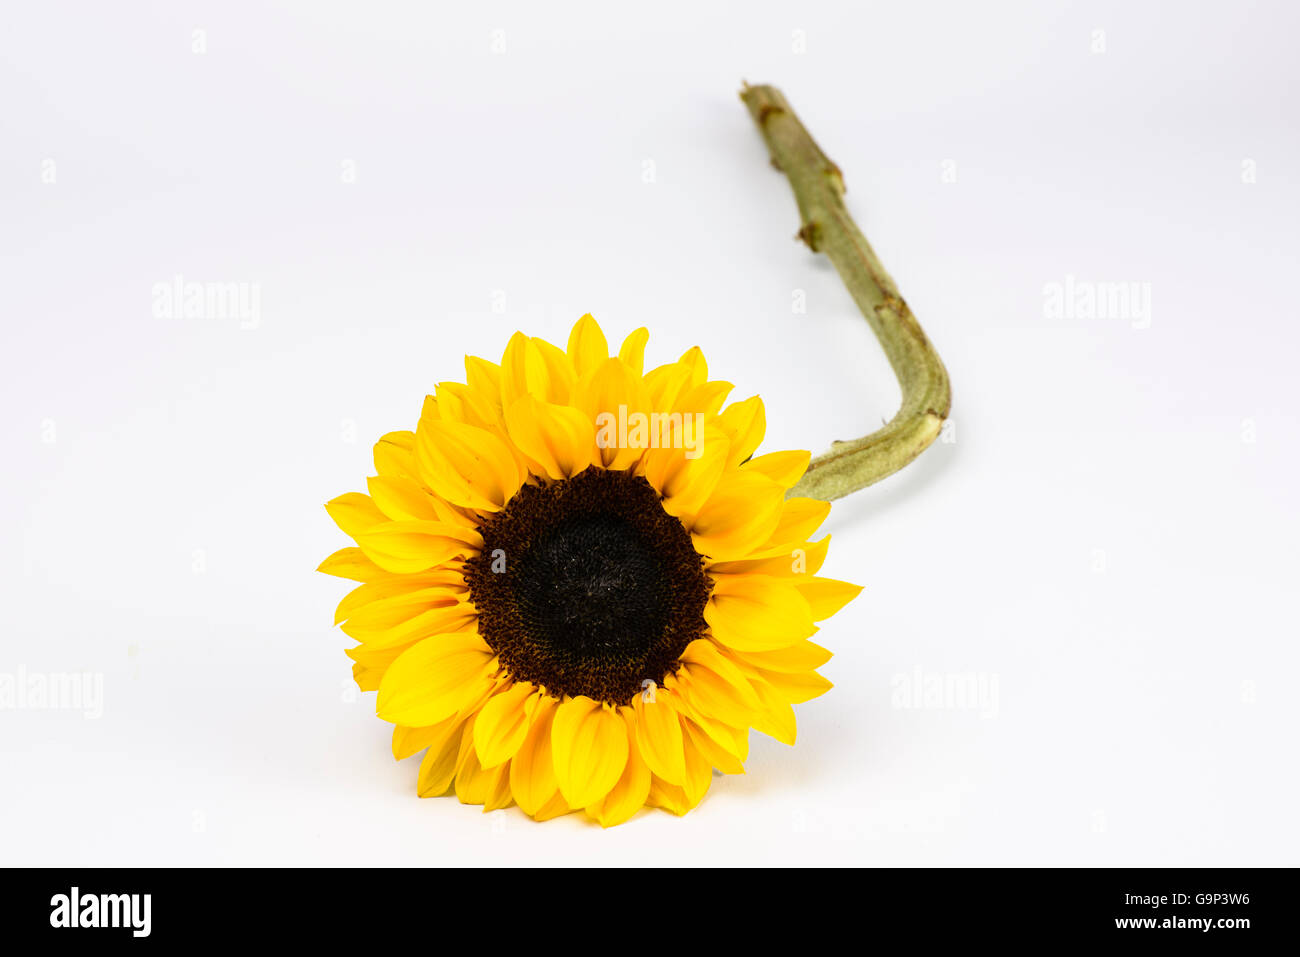 Single cut sunflower photographed against a white background Stock Photo